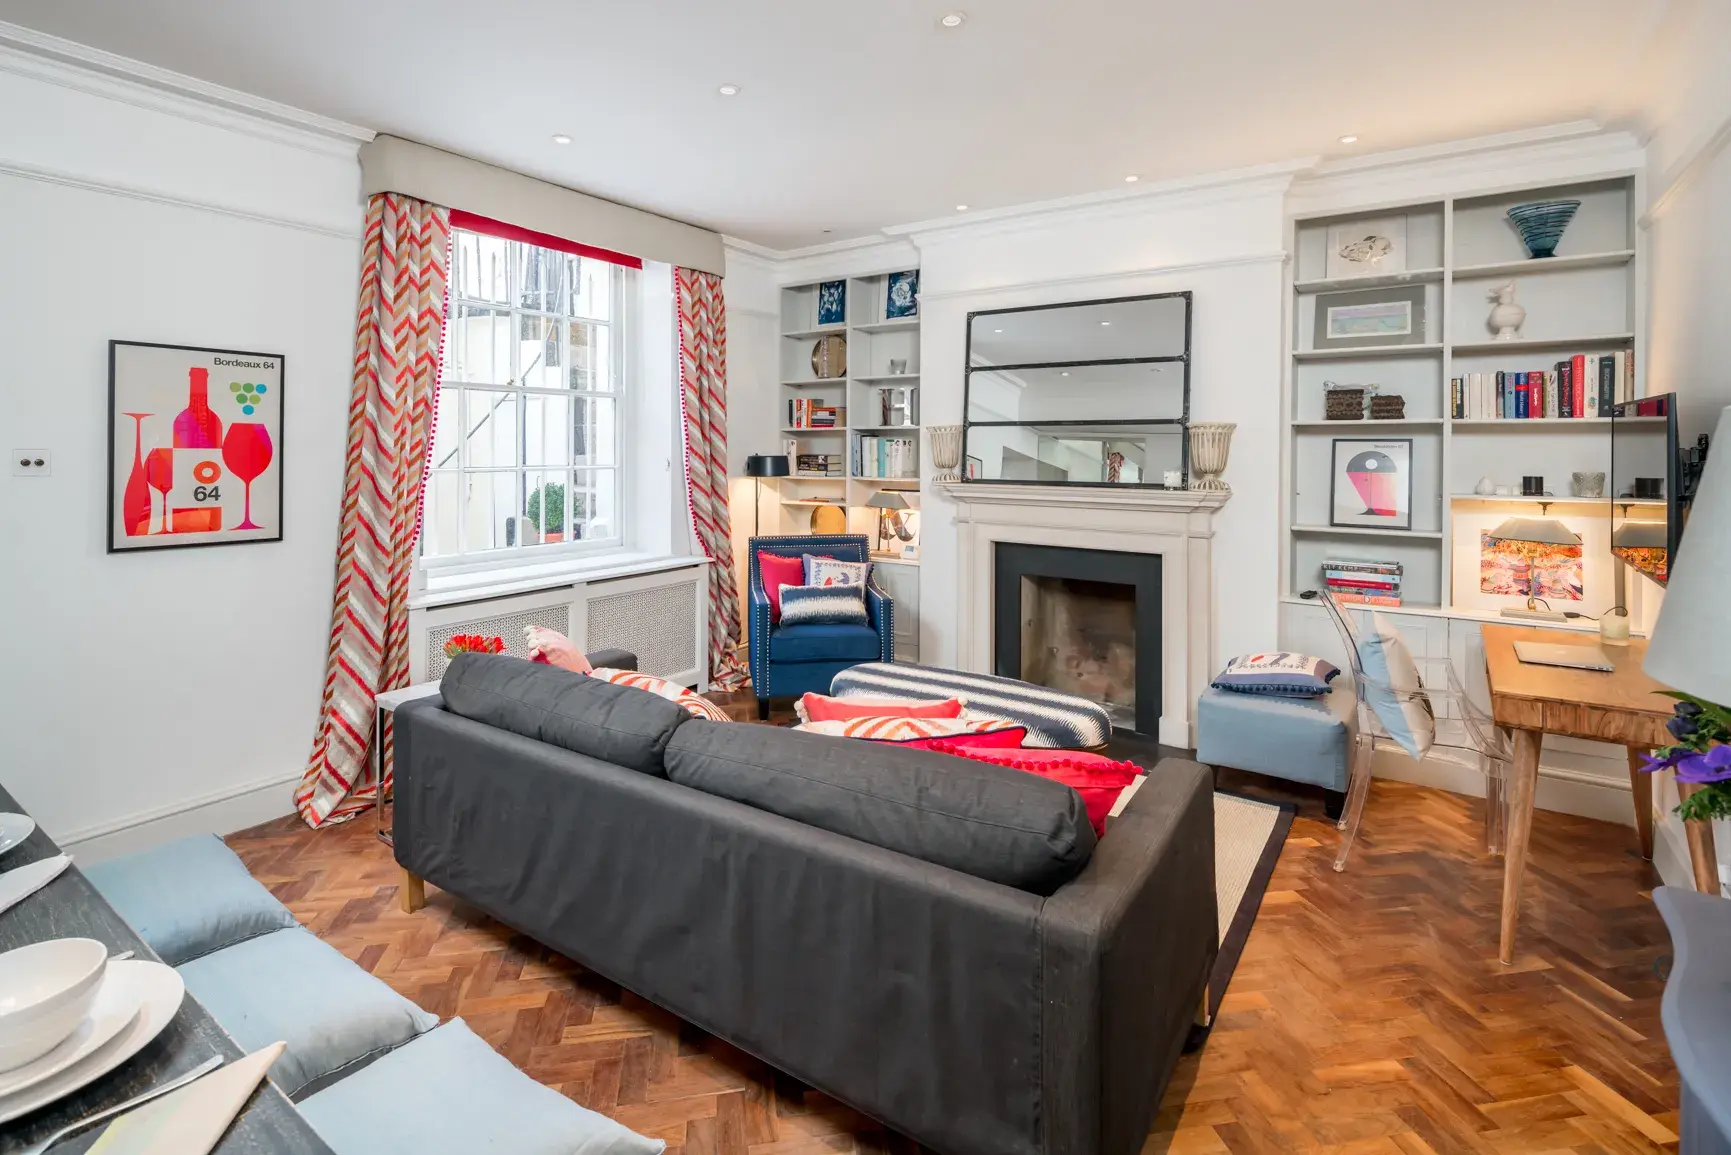 St Georges Drive, holiday home in Pimlico, London